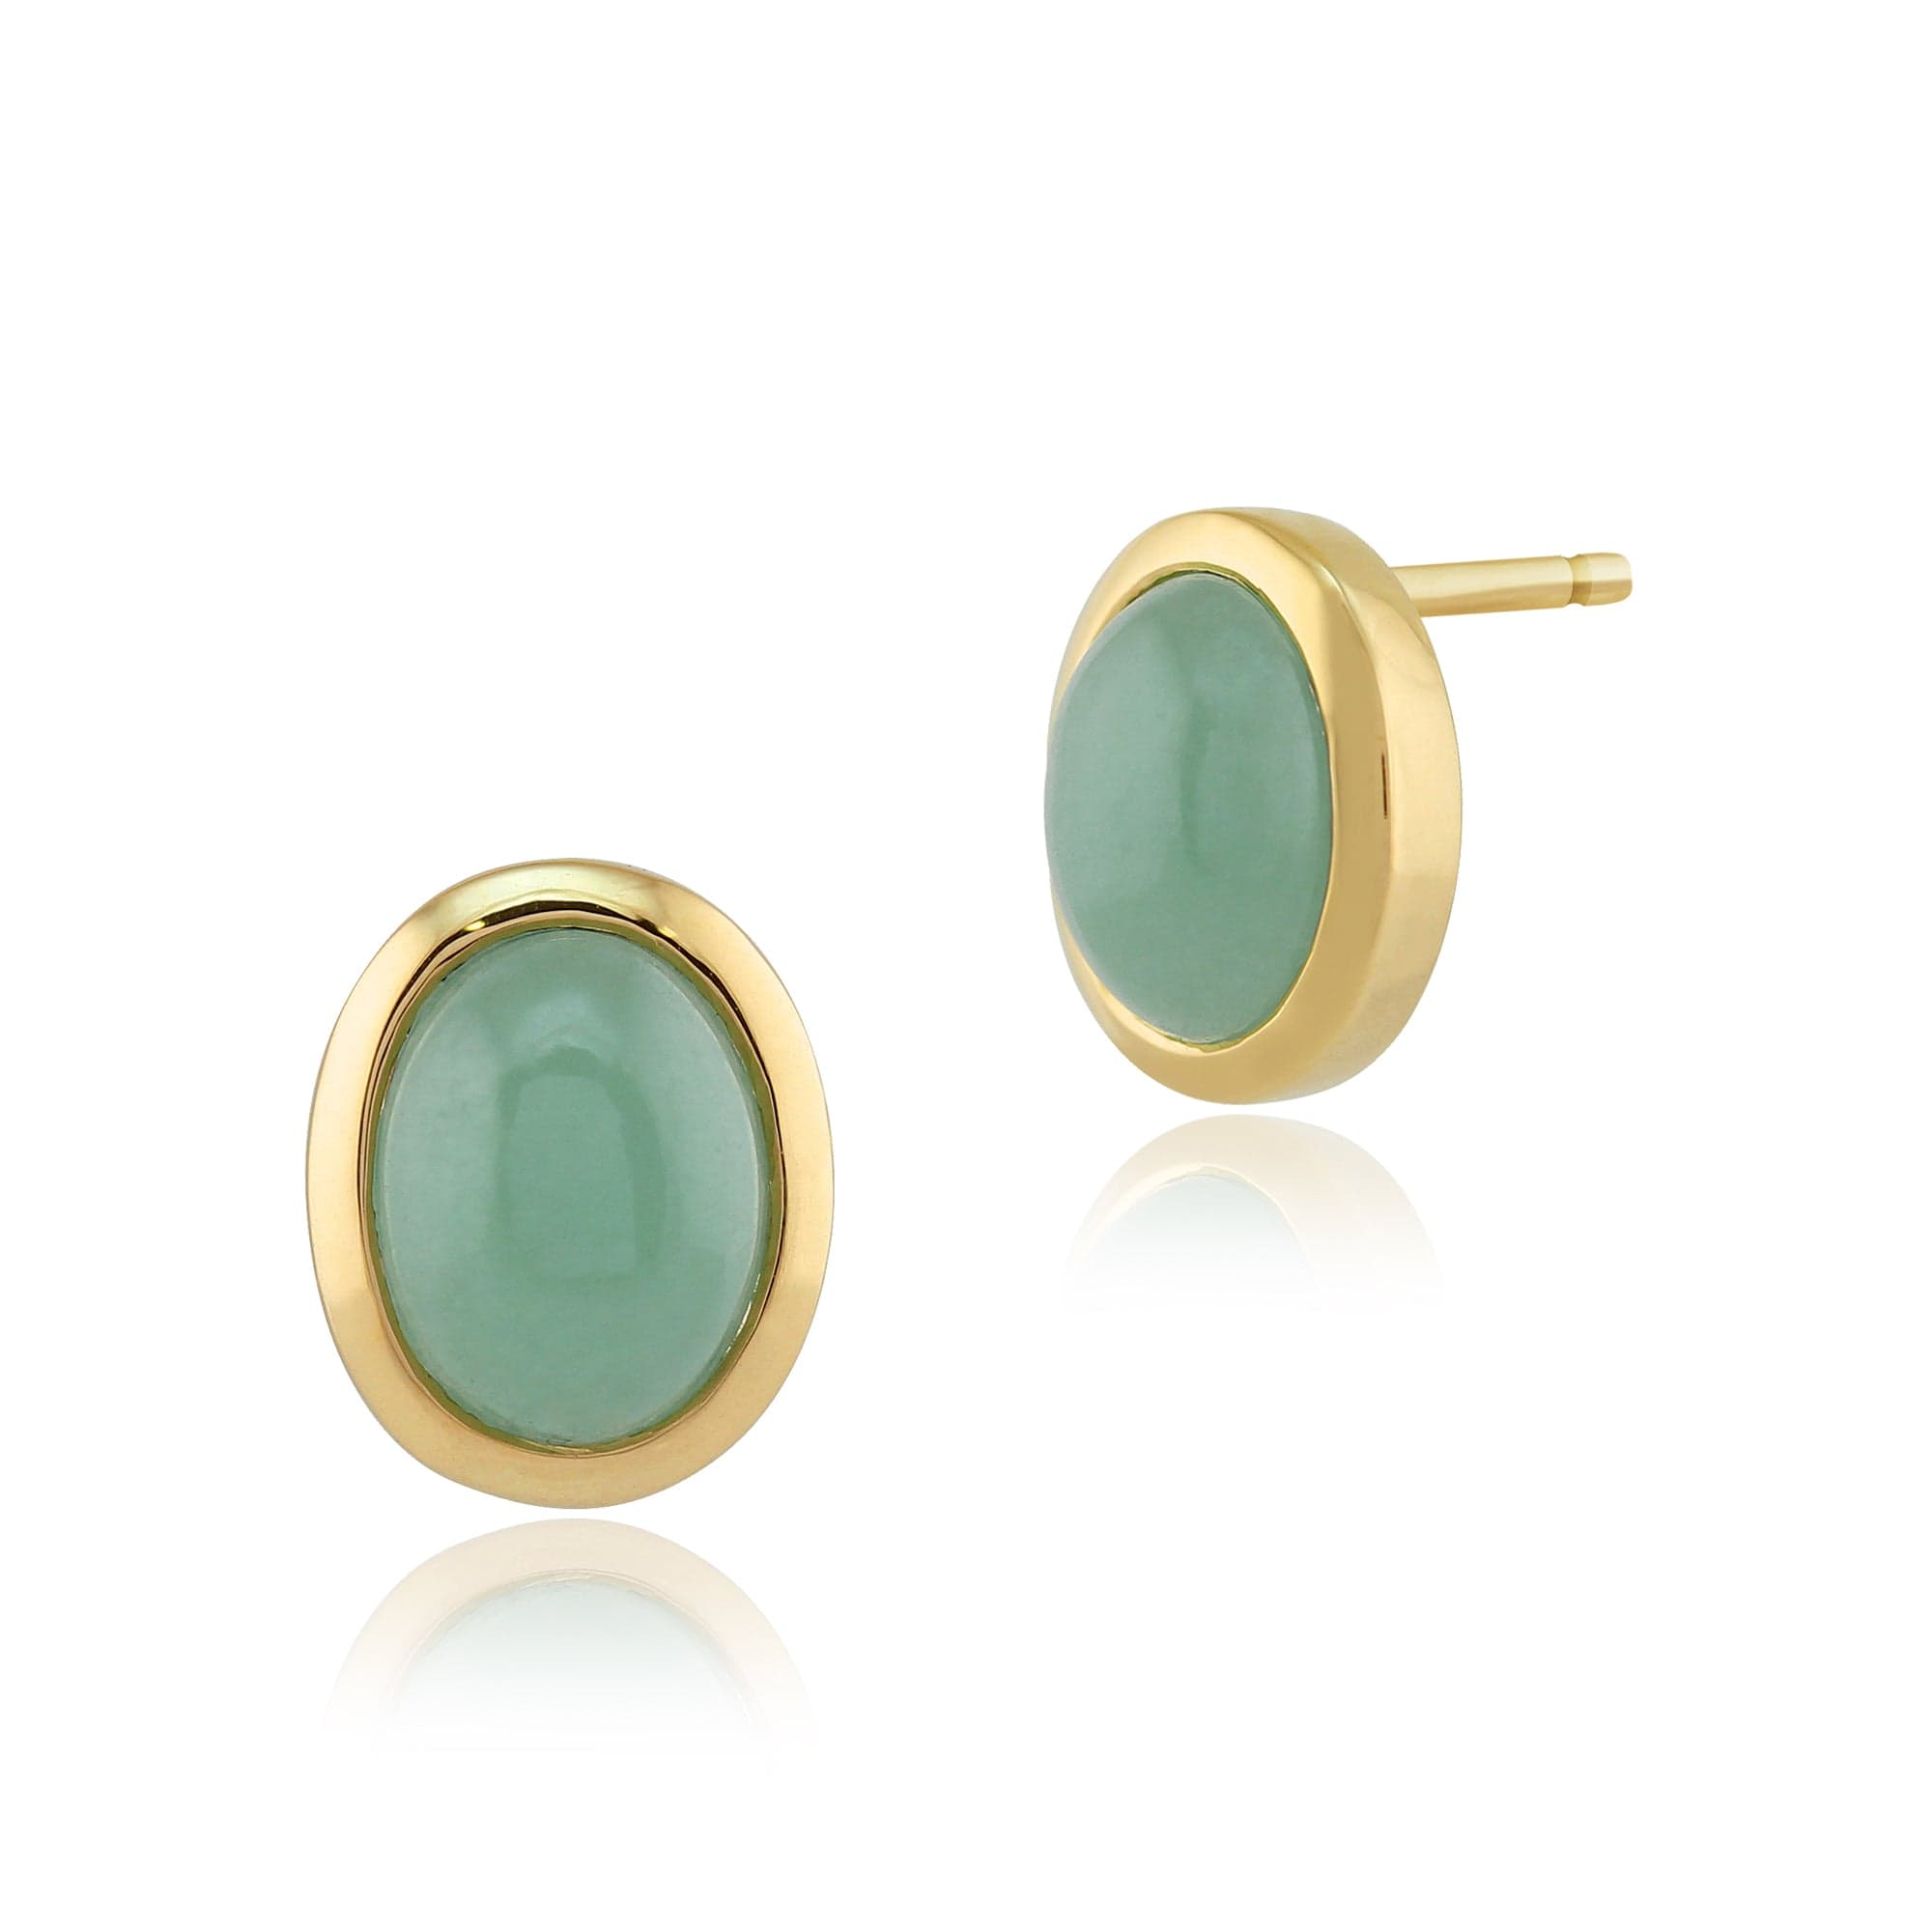 Classic Oval Jade Cabochon Stud Earrings in 9ct Yellow Gold 10x8mm - Gemondo